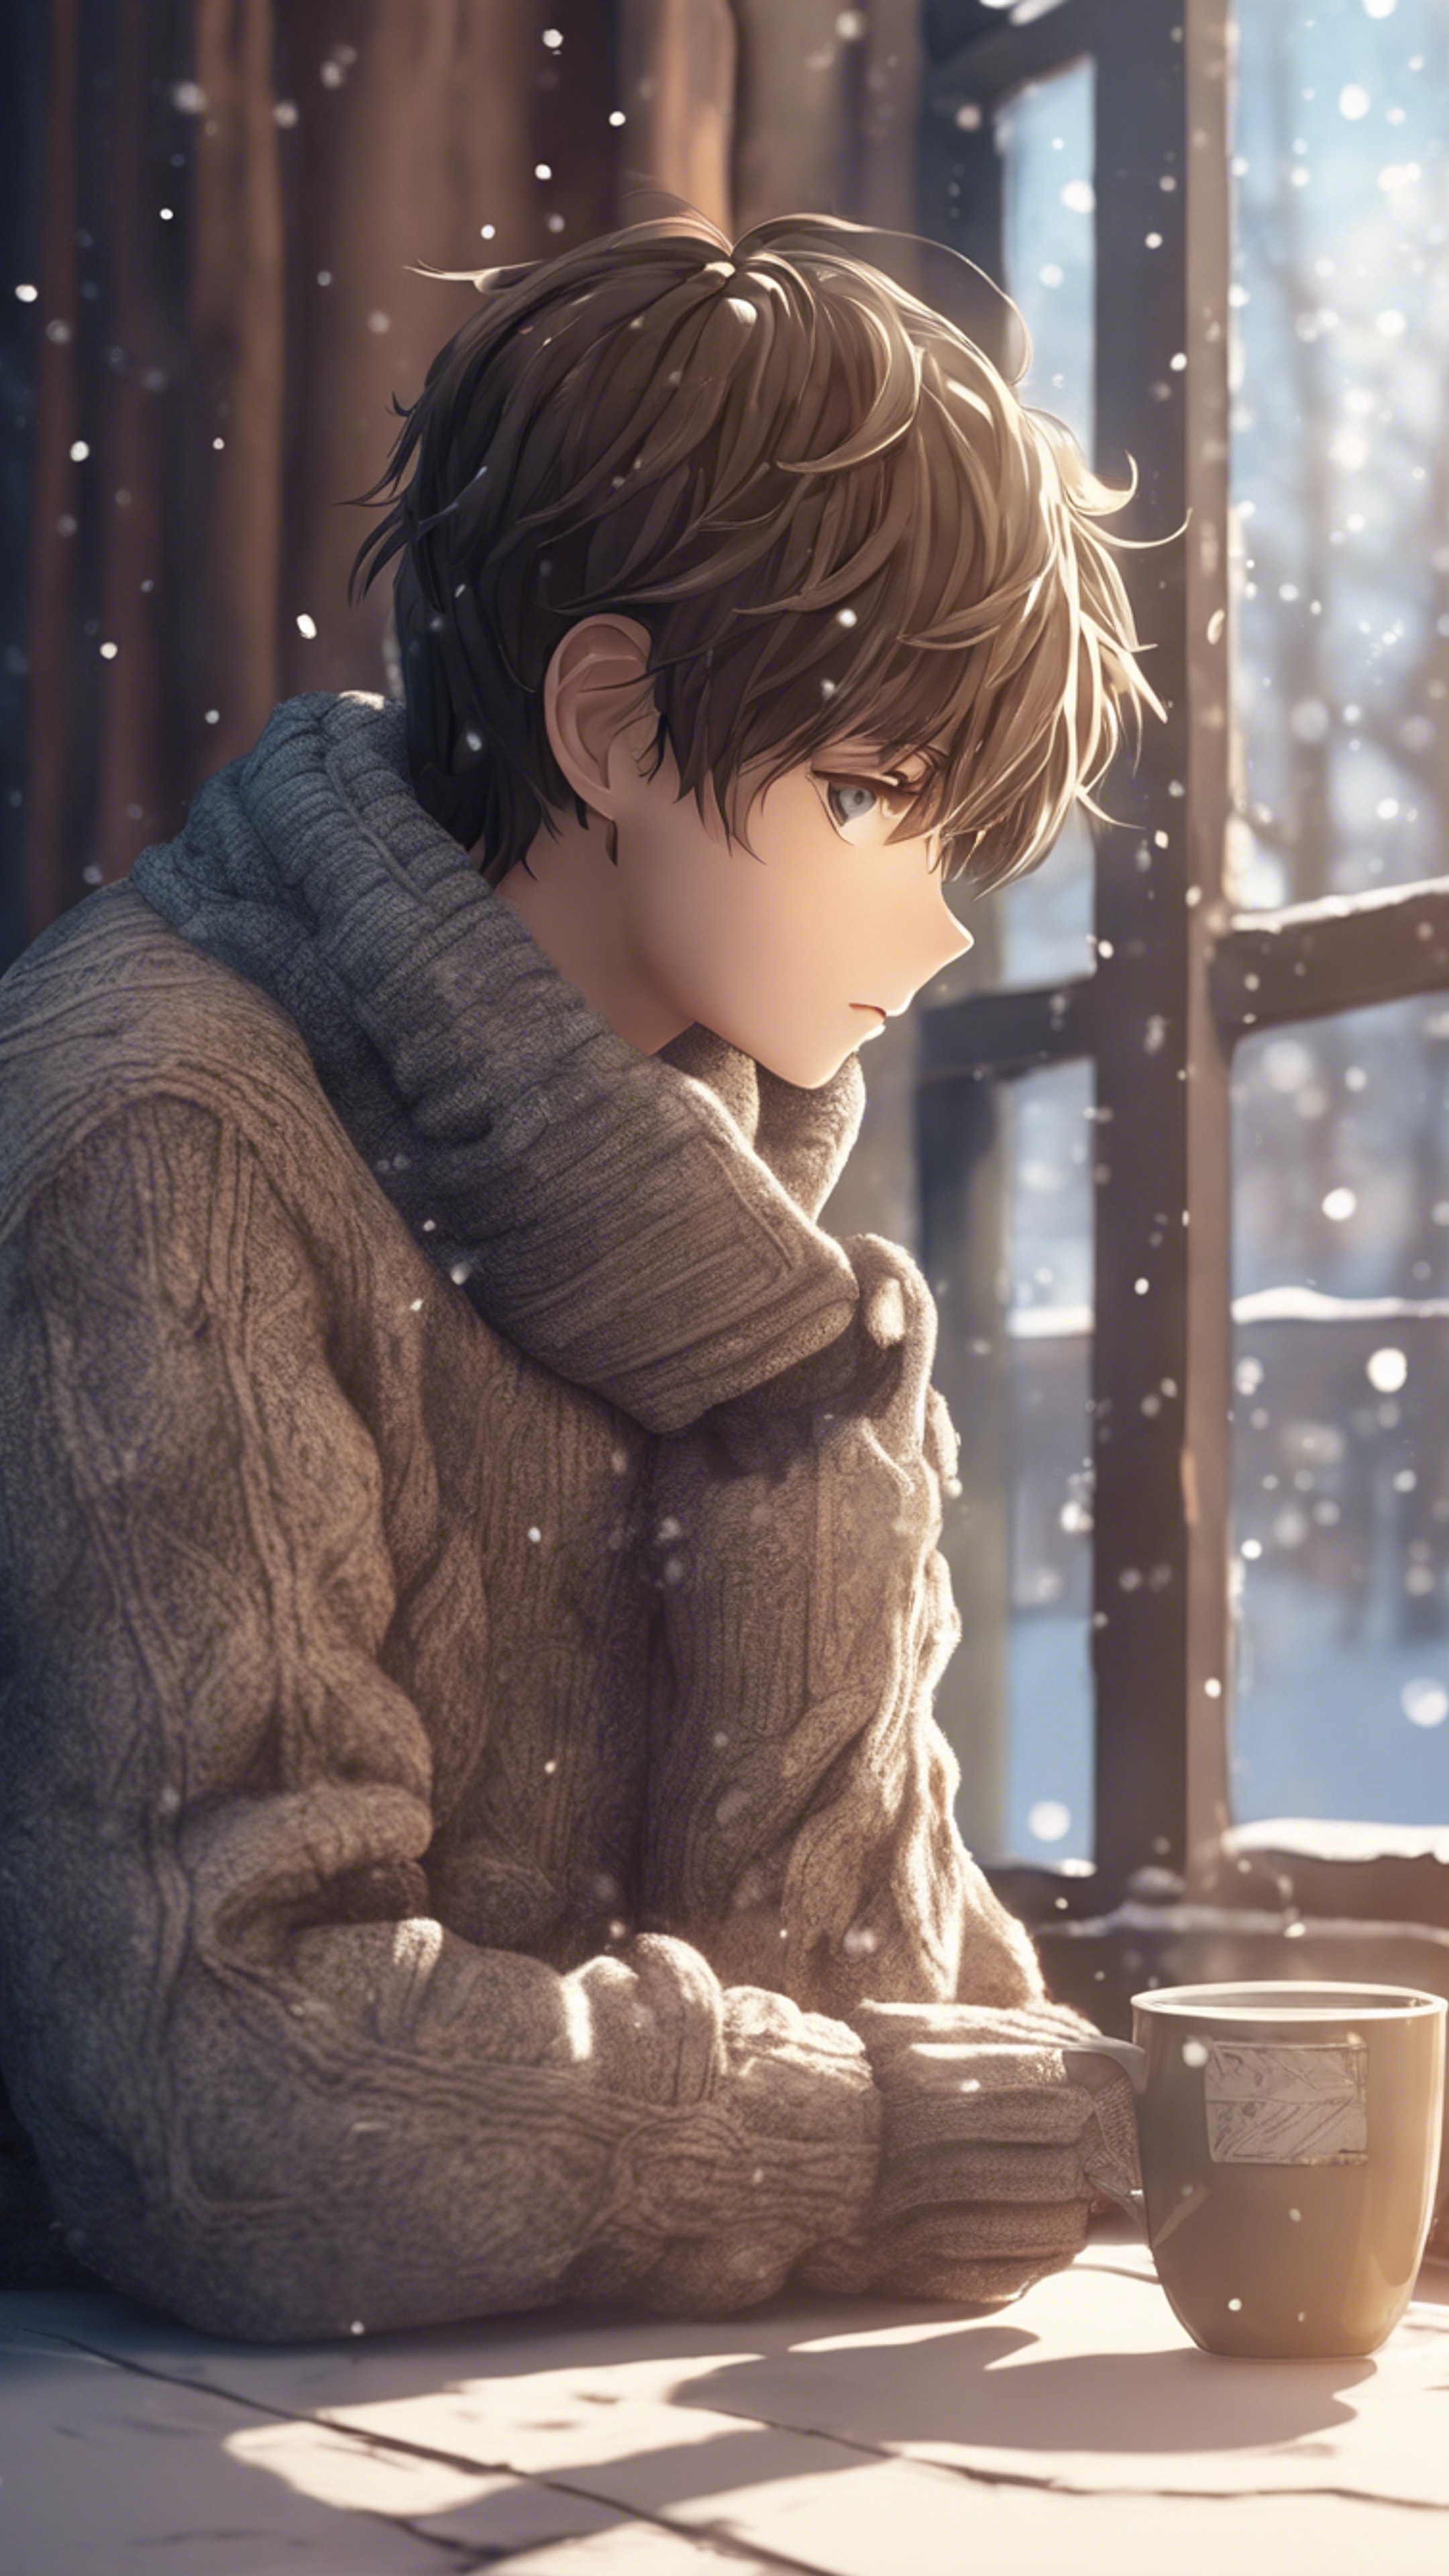 Anime boy in a cozy sweater sipping hot chocolate by a window on a cold winter day. Wallpaper[d5274b1353f14201bc28]